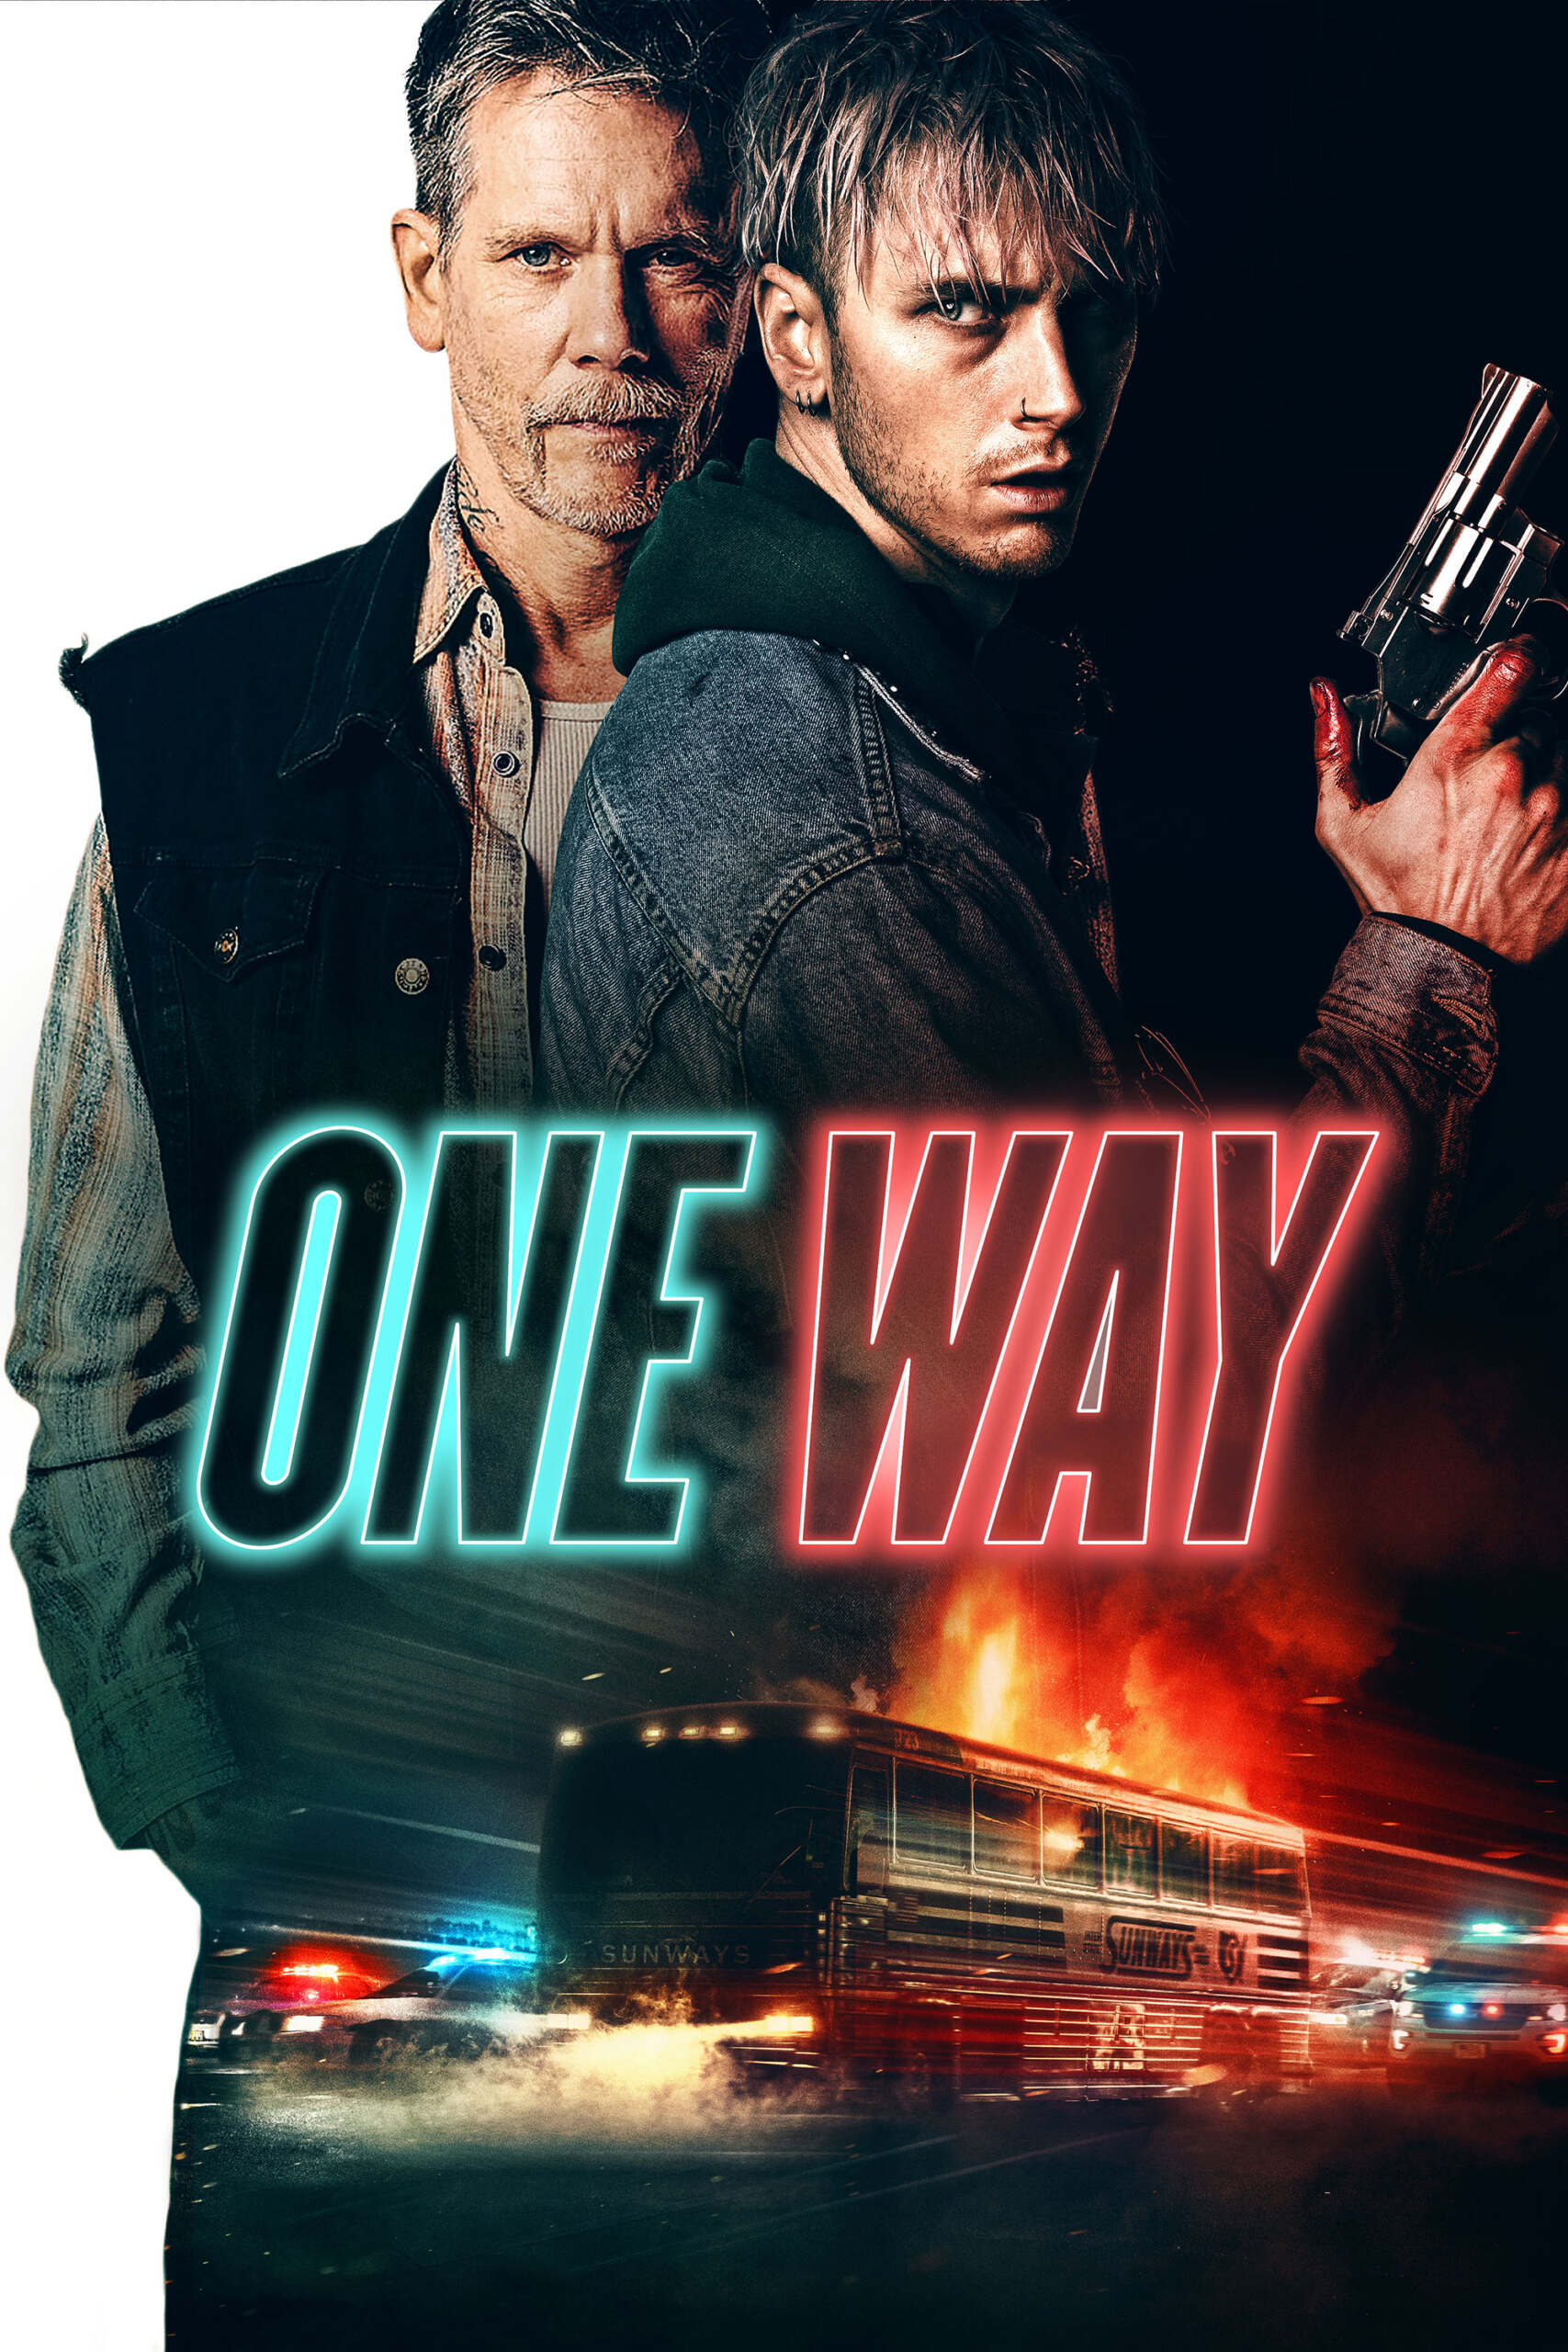 2nd Clip From 'One Way' Movie Starring Machine Gun Kelly, Storm Reid, & Kevin Bacon